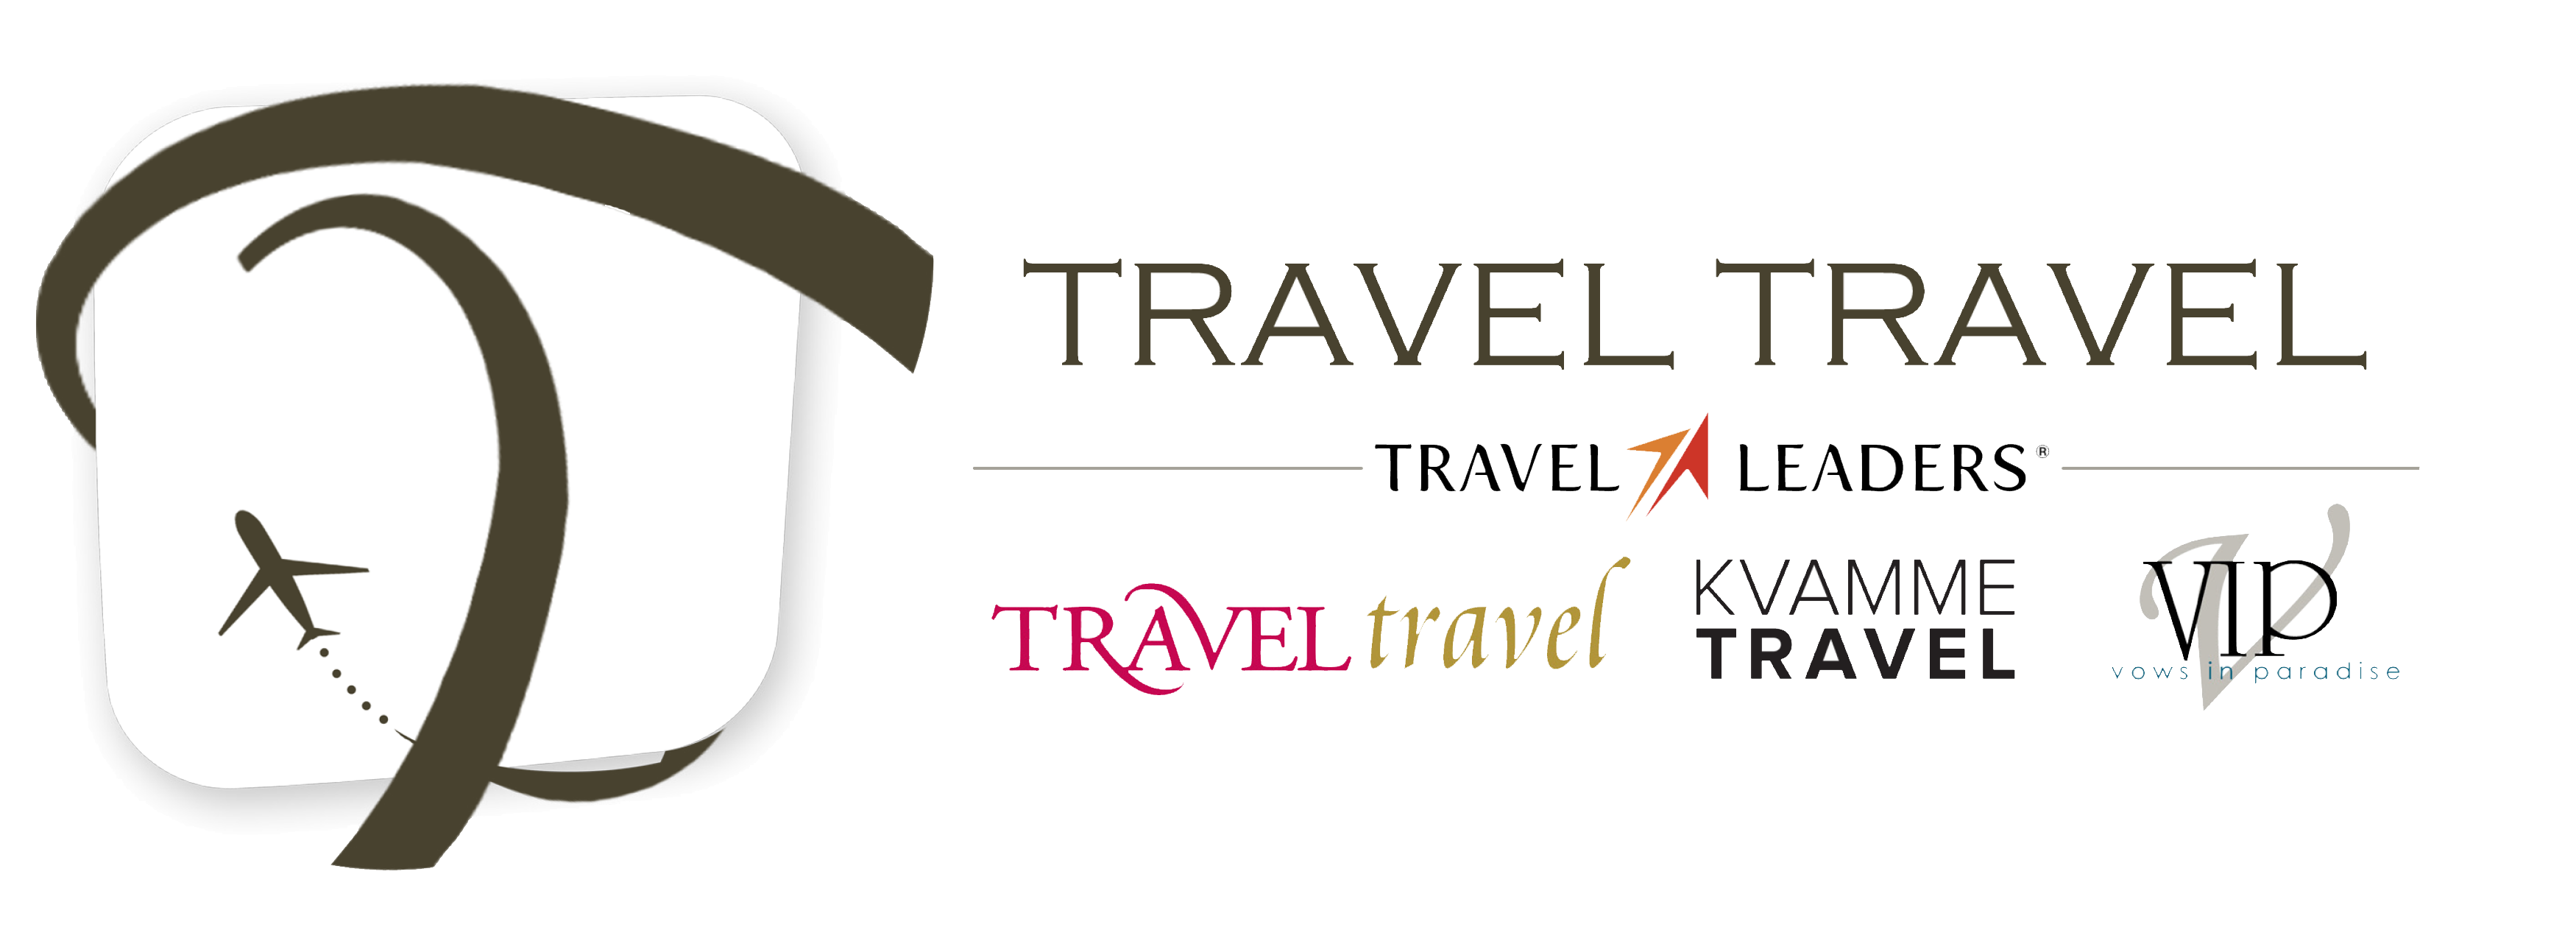 The Travel Travel Group